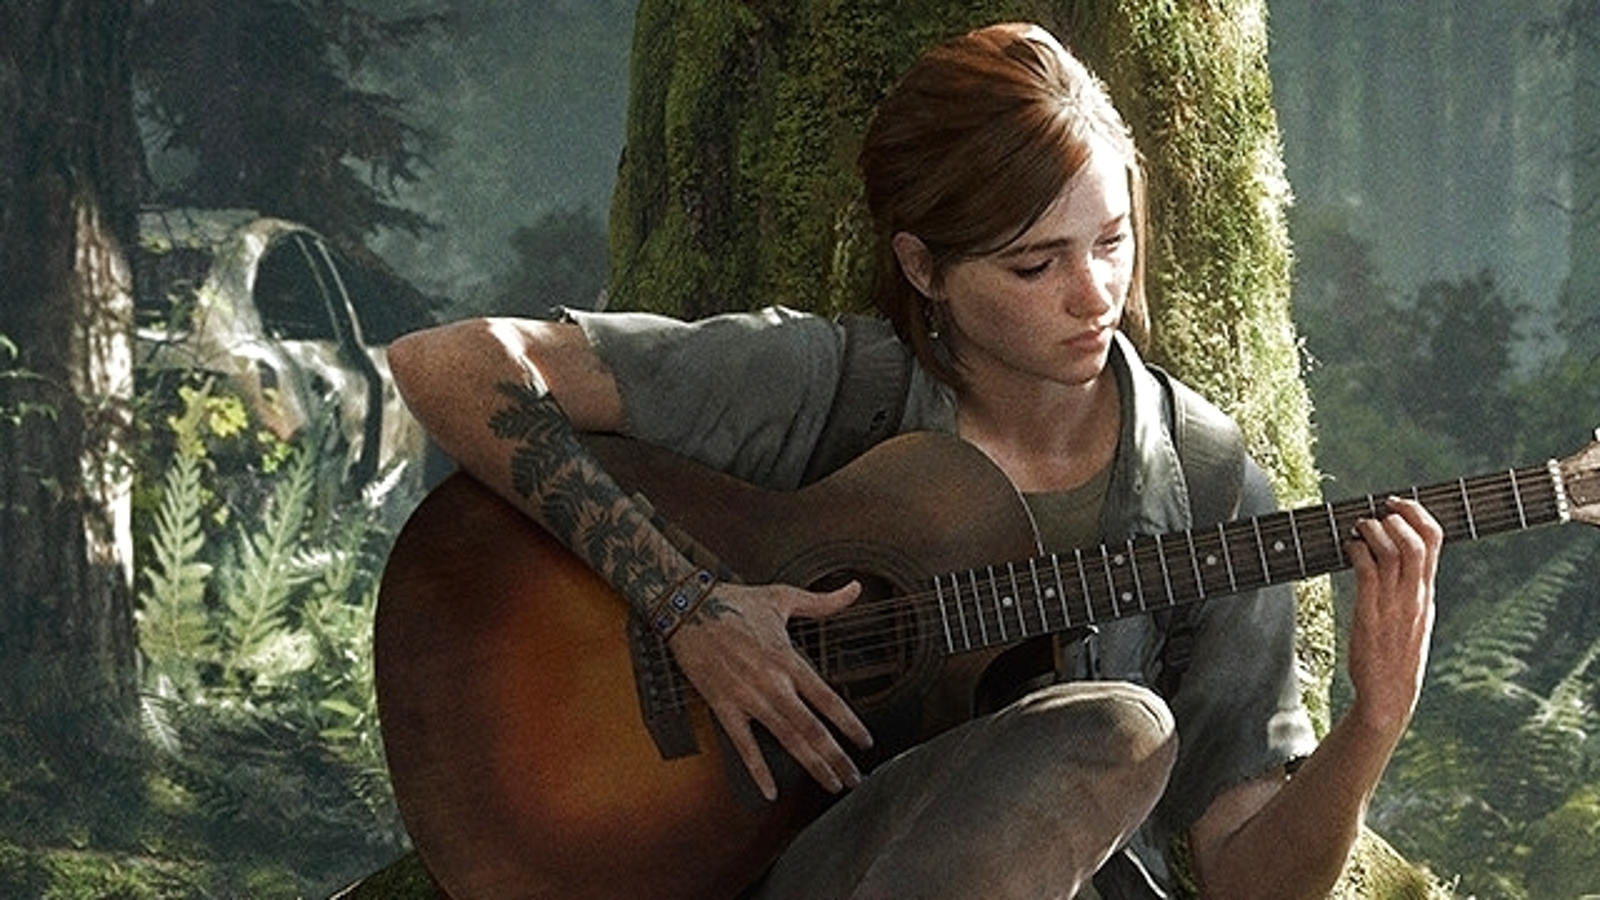 HD wallpaper: The Last of Us 2, the last of us part II, Ellie, Play Station